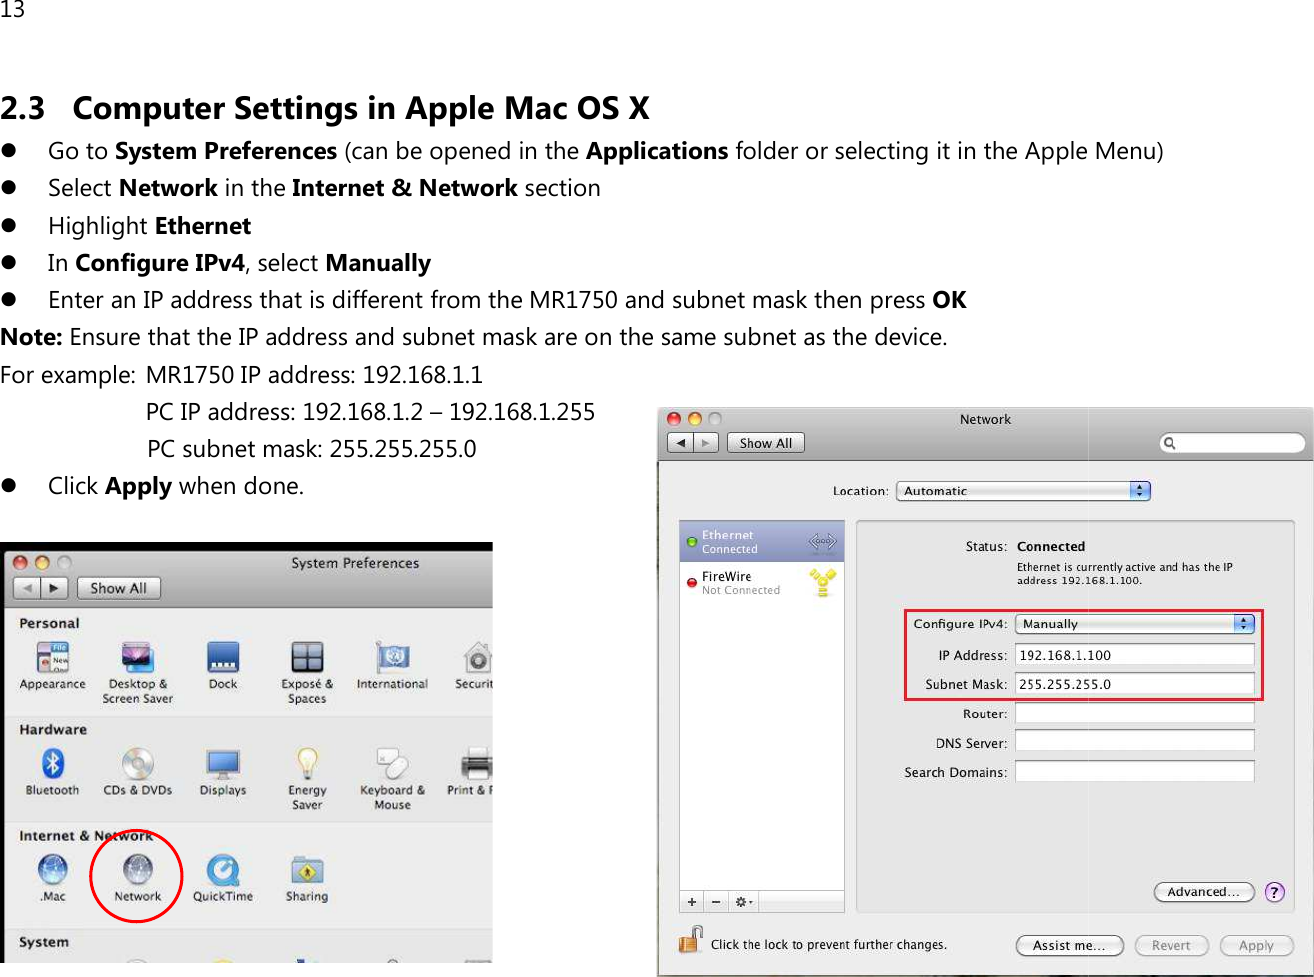 13  2.3 Computer Settings in Apple Mac OS X Go to System Preferences (can be opened in the  Select Network in the Internet &amp; Network Highlight Ethernet  In Configure IPv4, select Manually  Enter an IP address that is different from the Note: Ensure that the IP address and subnet mask are on the same subnet as the device.  For example:  MR1750 IP address: 192.168.1.1PC IP address: 192.168.1.2 – 192.168.1.25  PC subnet mask: 255.255.255.0 Click Apply when done.  Computer Settings in Apple Mac OS X can be opened in the Applications folder or selecting it in the Apple Internet &amp; Network section that is different from the MR1750 and subnet mask then press OK Ensure that the IP address and subnet mask are on the same subnet as the device.   IP address: 192.168.1.1 192.168.1.255 PC subnet mask: 255.255.255.0  or selecting it in the Apple Menu) 